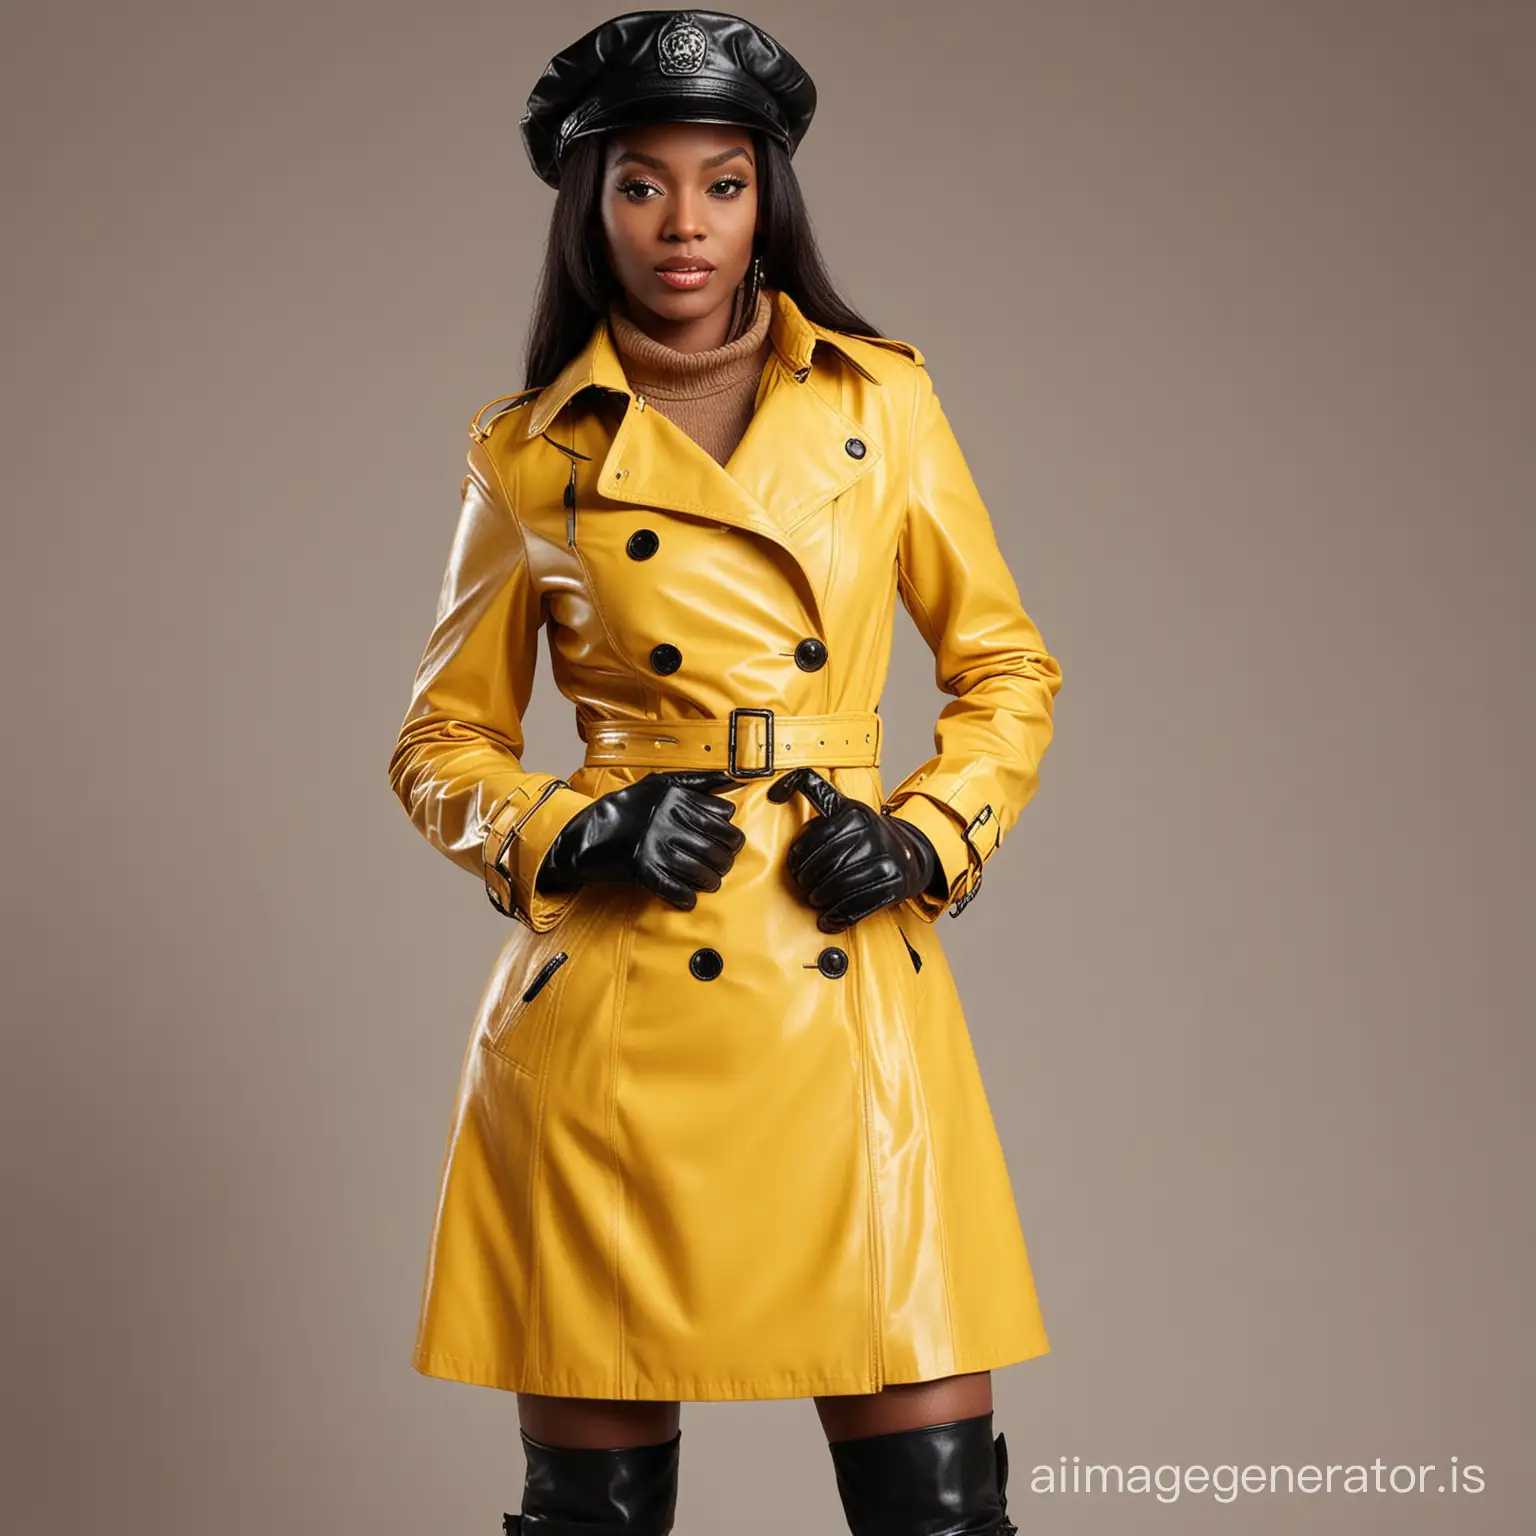 sleazy black woman in yellow leather trench coat, black leather gloves, master cap, leather boots